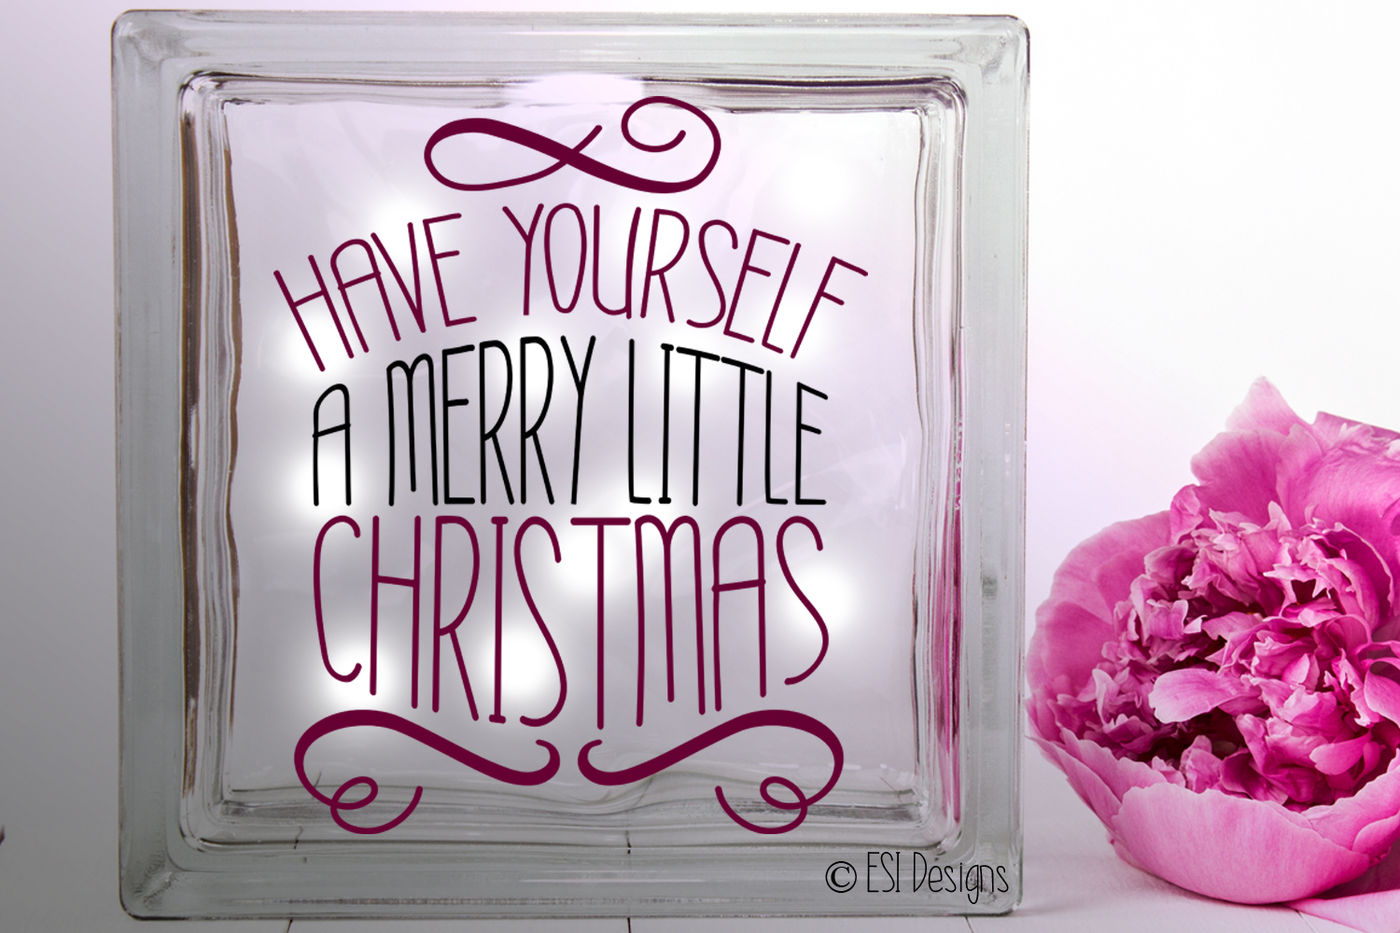 Have Yourself A Merry Little Christmas Christmas Quote Design By Esi Designs Thehungryjpeg Com